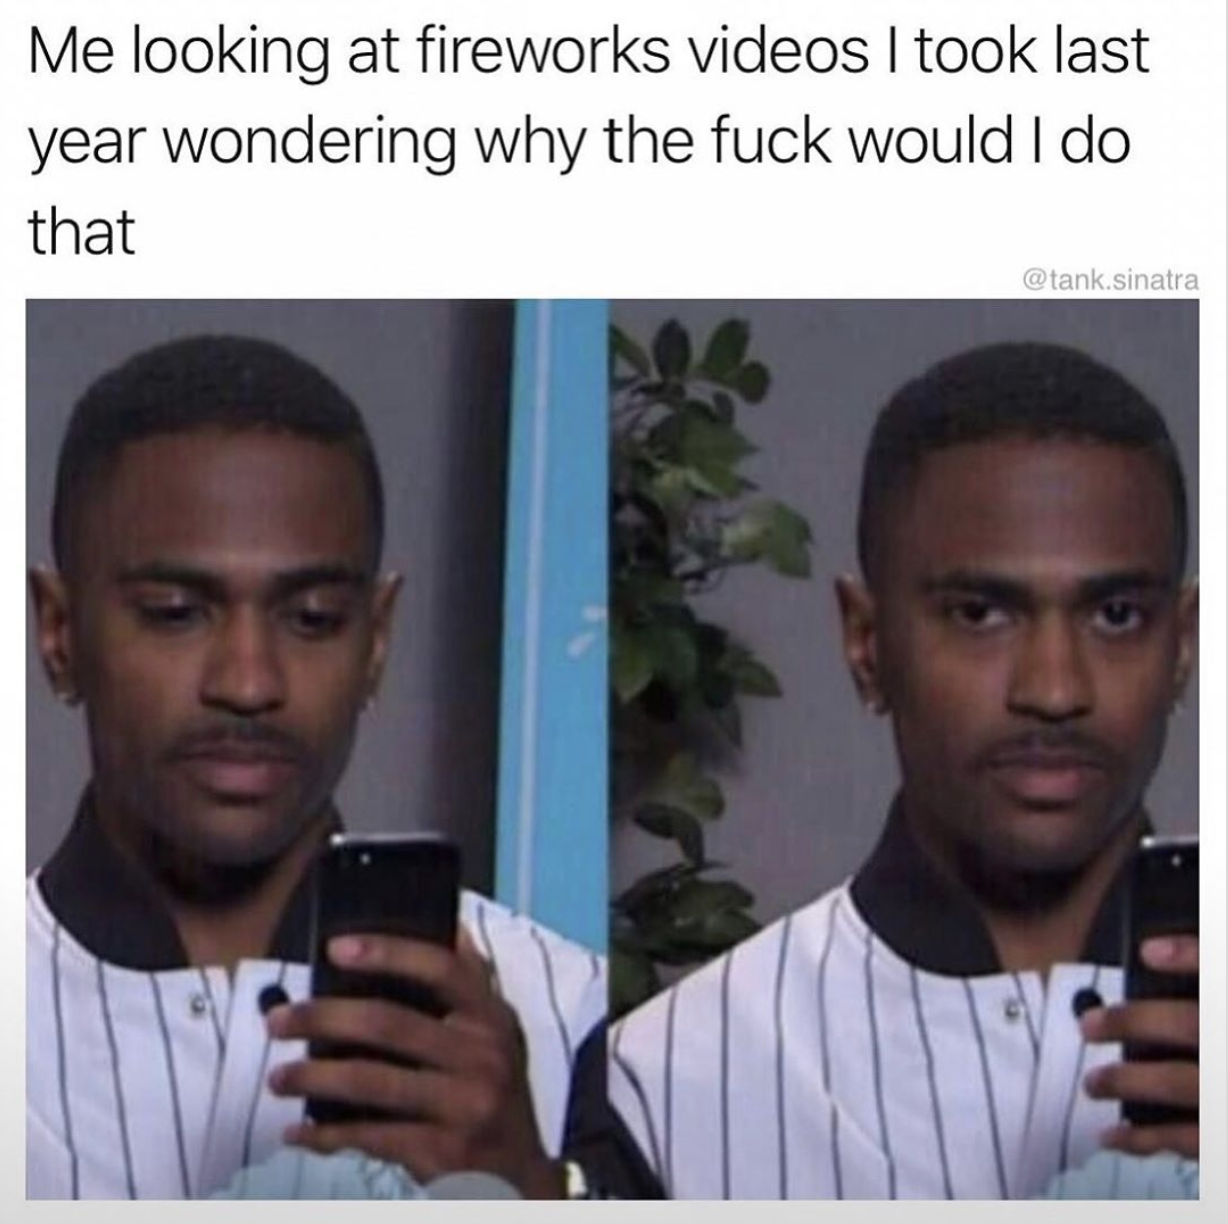 me looking at fireworks videos i took last year wondering why the fuck would i do that, 4th of july meme, fourth of july meme, 4th of july memes, funny fourth of july memes, funny 4th of july meme, 4th of july meme 2020, 4th of july memes 2020, 2020 4th of july meme, 2020 4th of july memes, funny 4th of july memes, 4th of july funny memes, funny happy 4th of july memes, funny memes 4th of july, hilarious 4th of july memes, independence day 2020 meme, independence day 2020 memes, 2020 independence day meme, quarantine 4th of july meme, coronavirus 4th of july meme, covid 4th of july meme, fourth of july memes, independence day meme, independence day memes, funny independence day meme, funny independence day memes, 4th of july 2020 meme, 4th of july 2020 memes